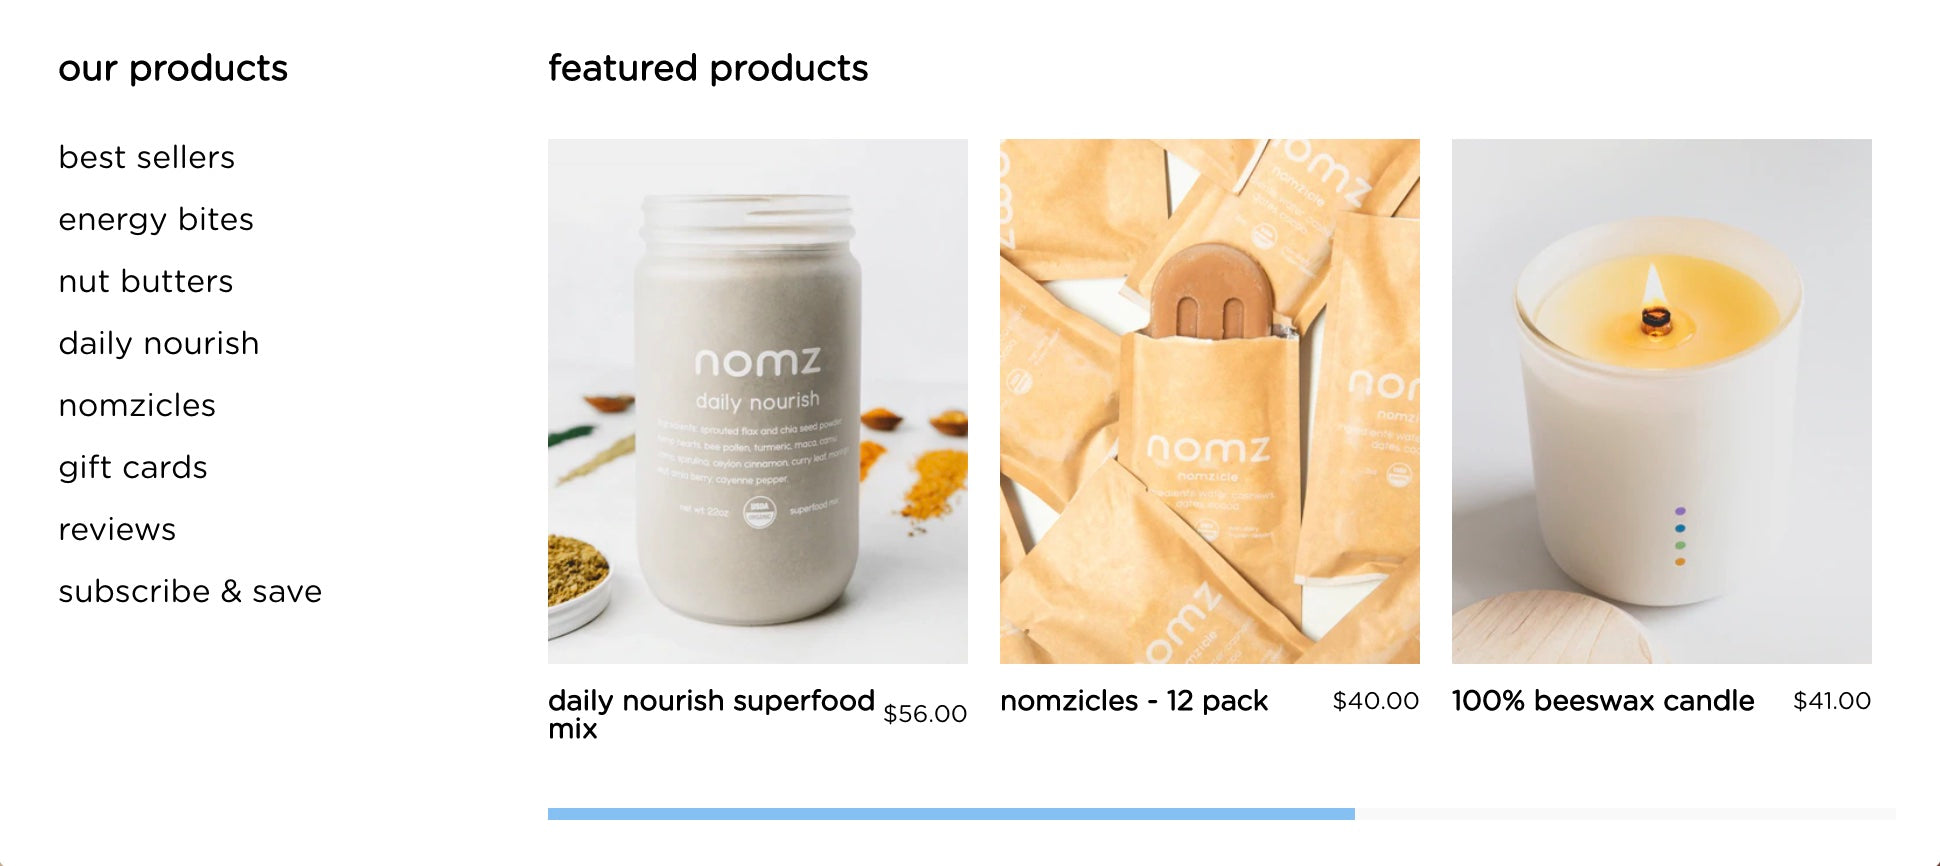 Nomz featured products